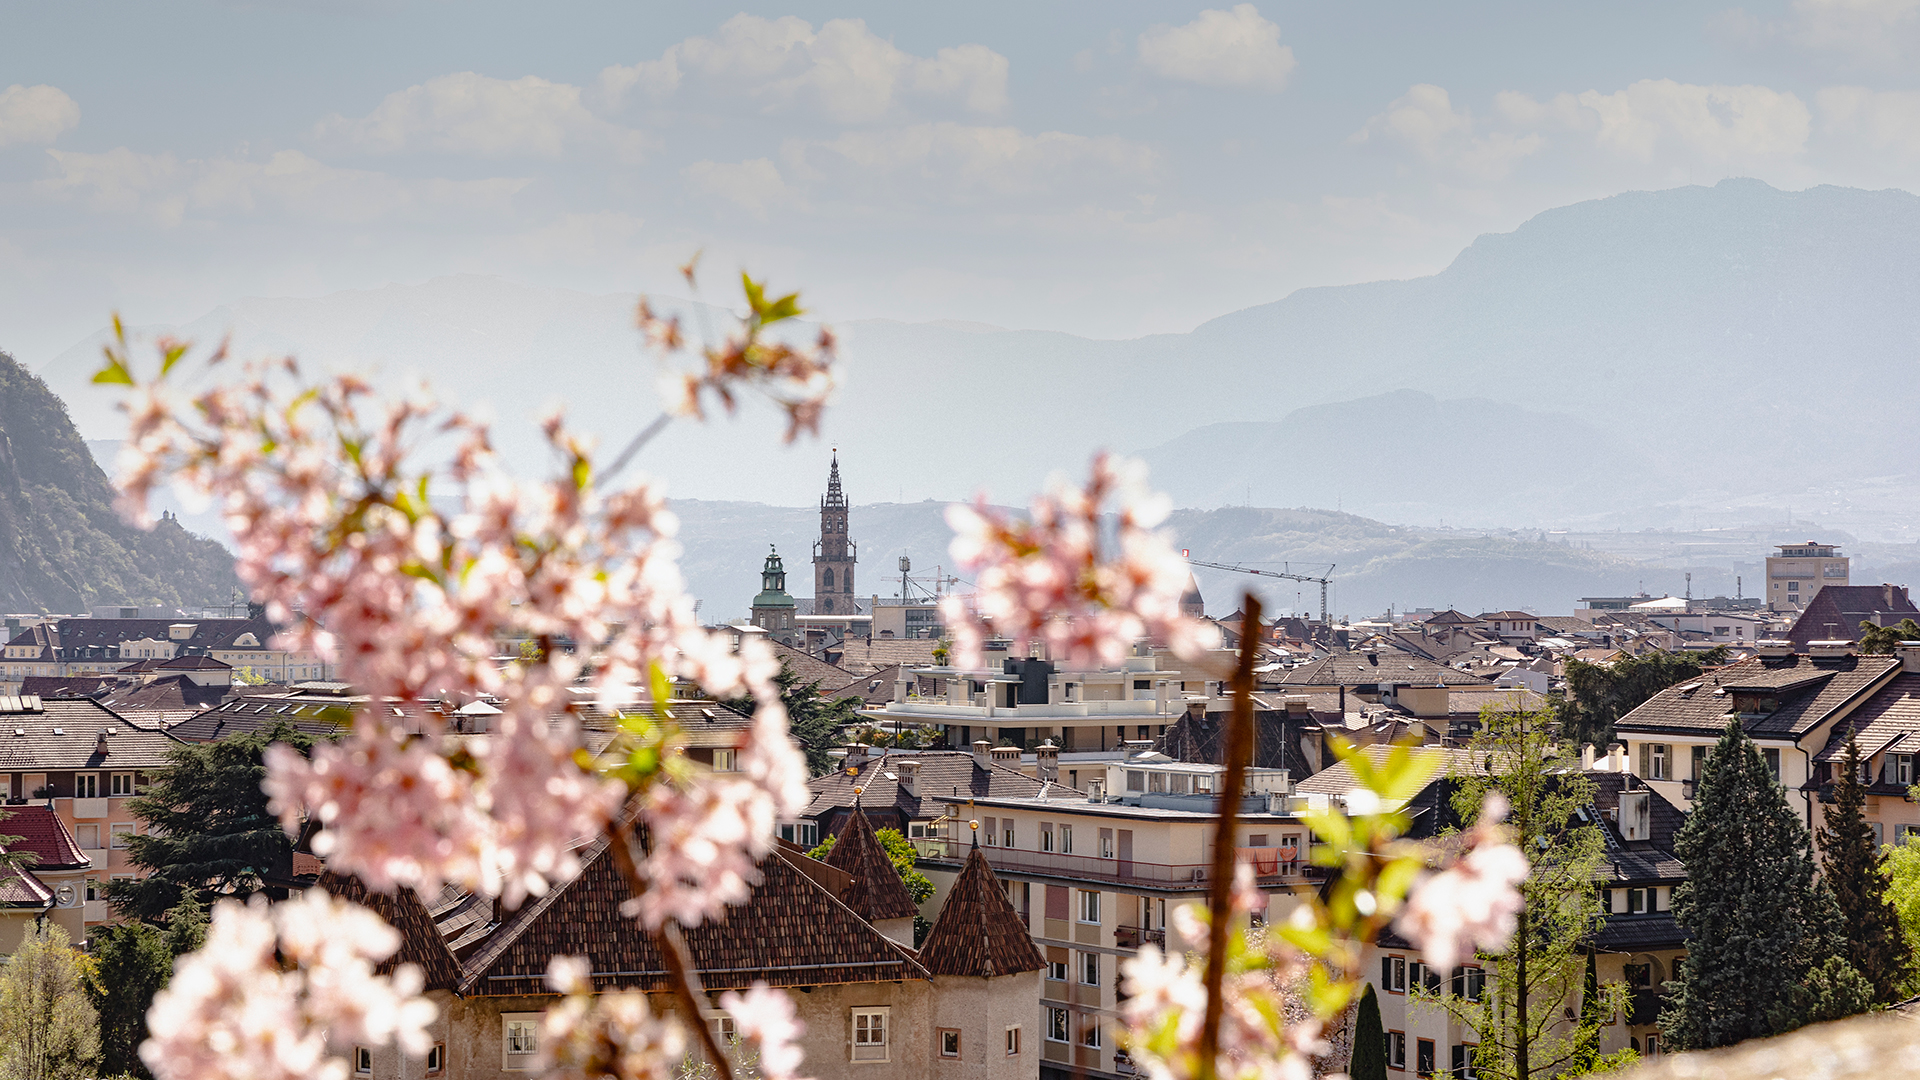 Panorama of the centre of Bolzano seen from a high point of a building on a spring morning.